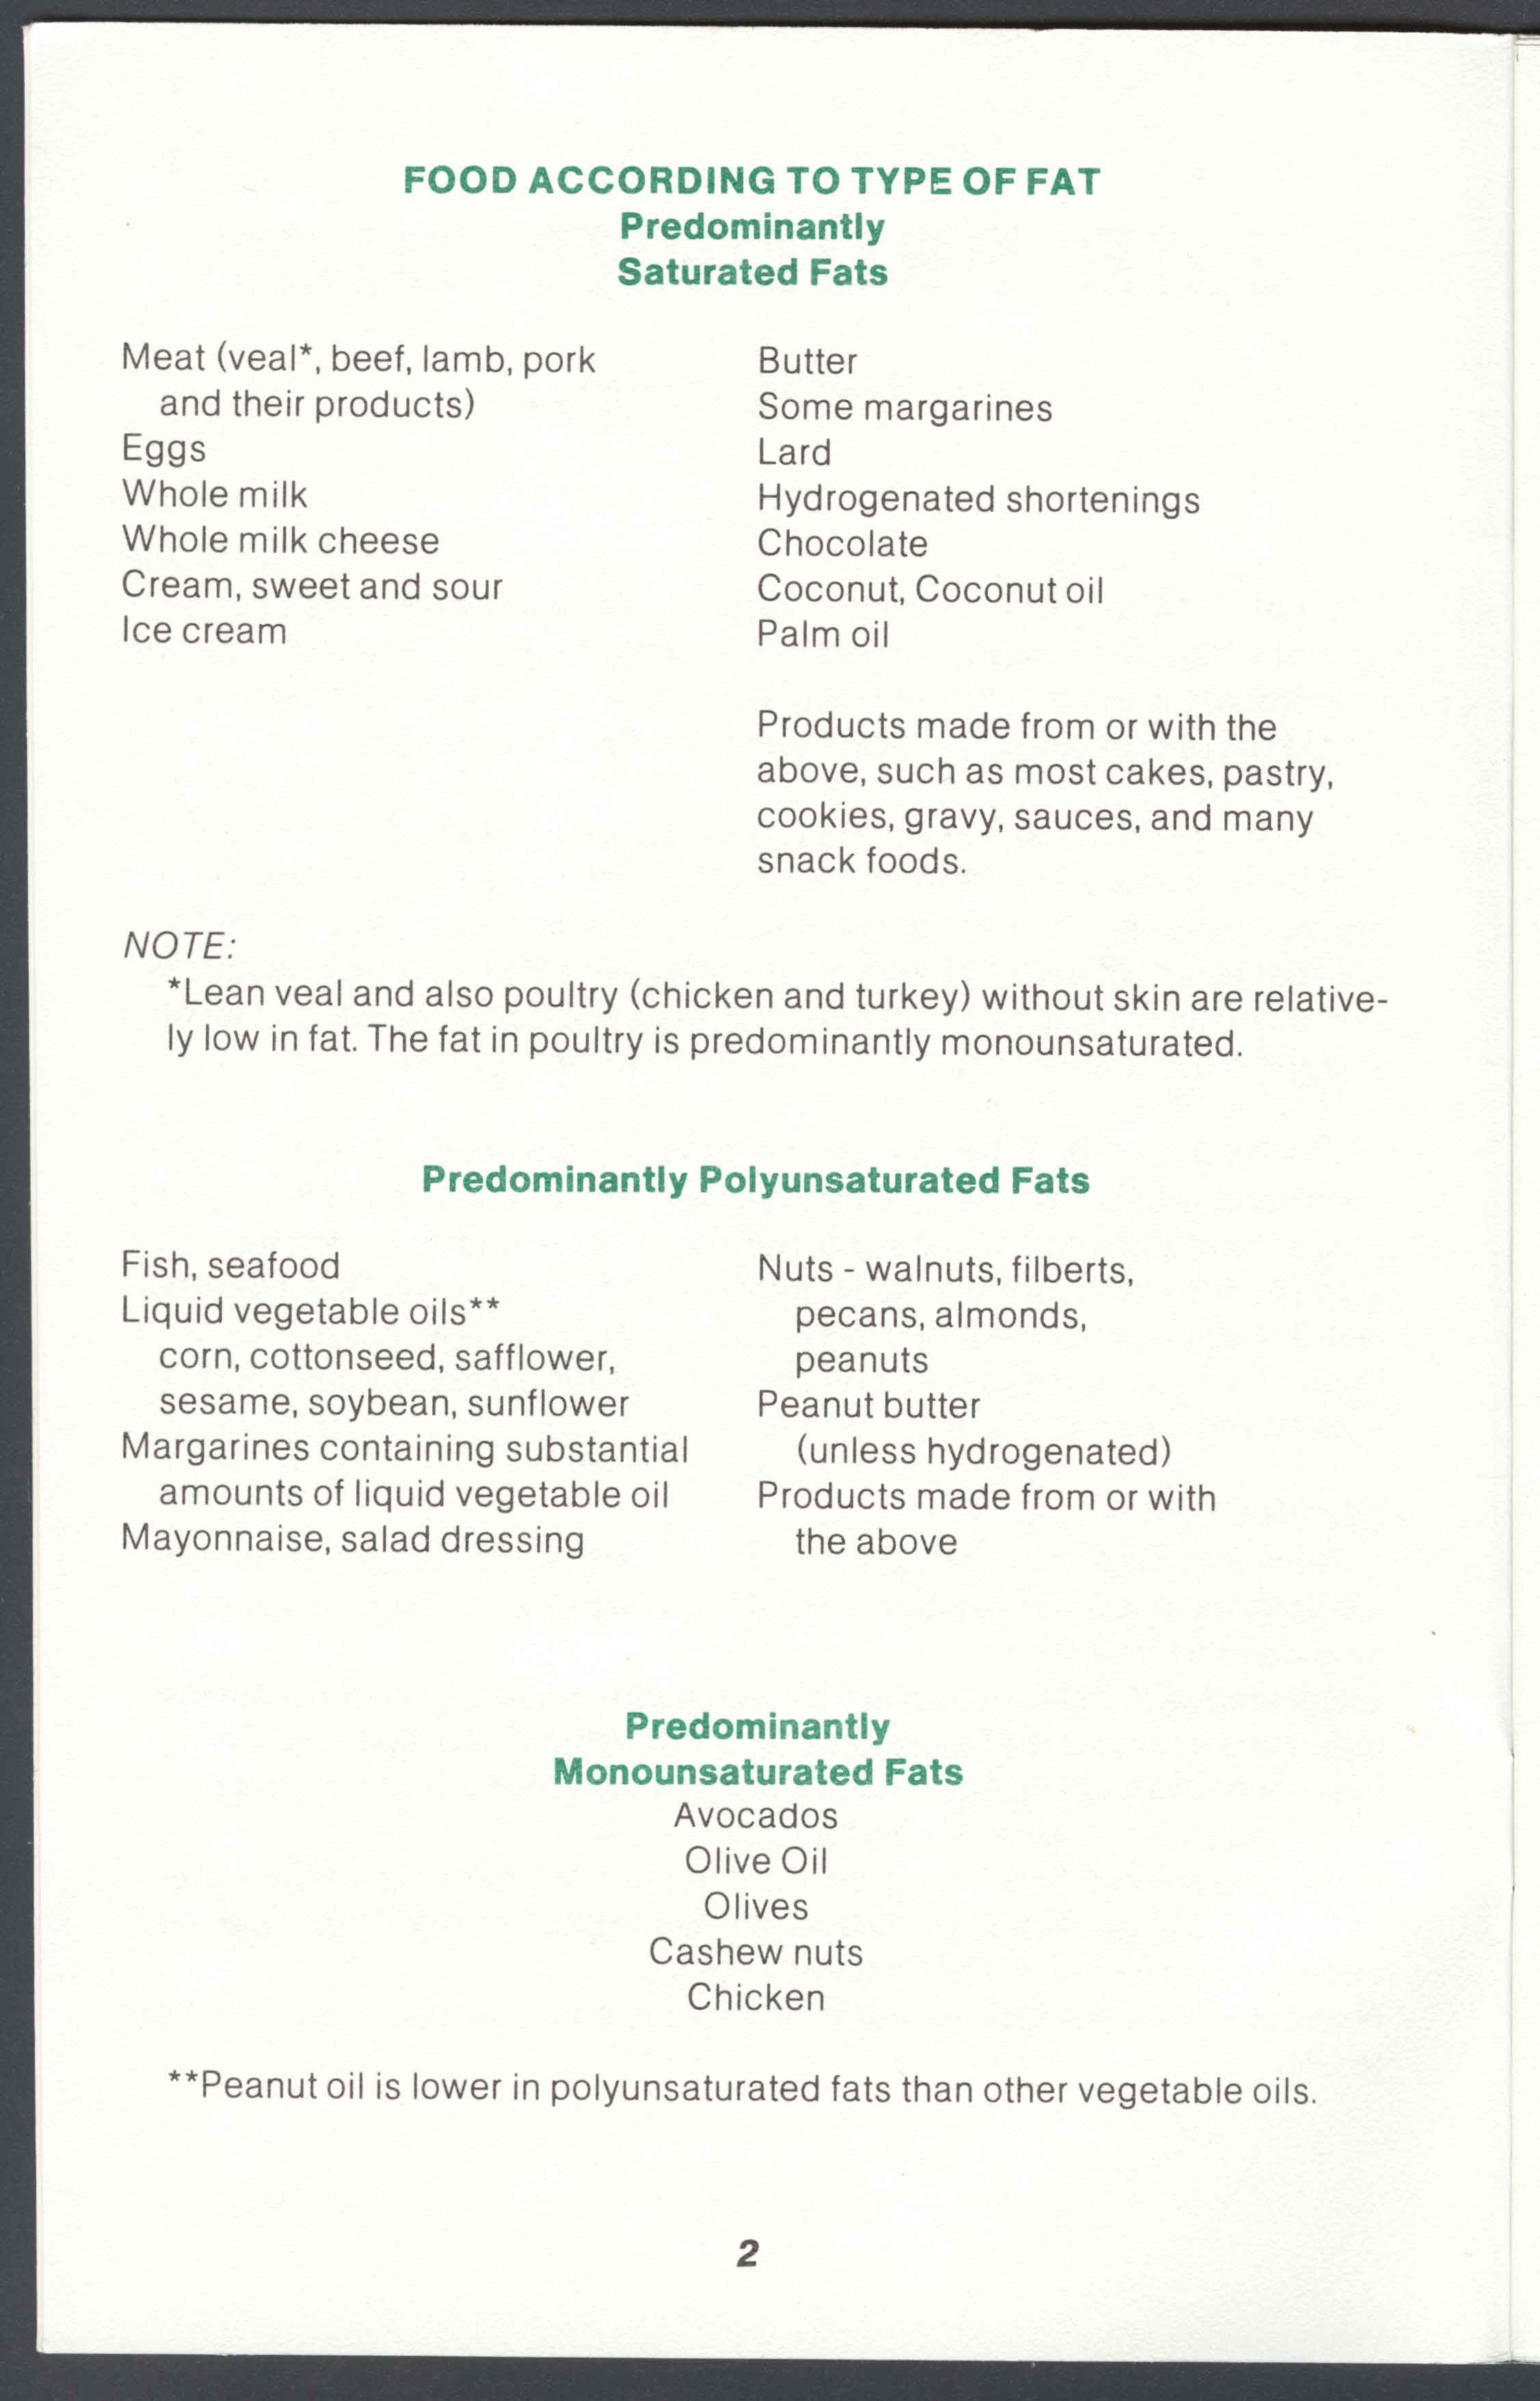 Page from The Prudent Diet from Bureau of Nutrition, Department of Health